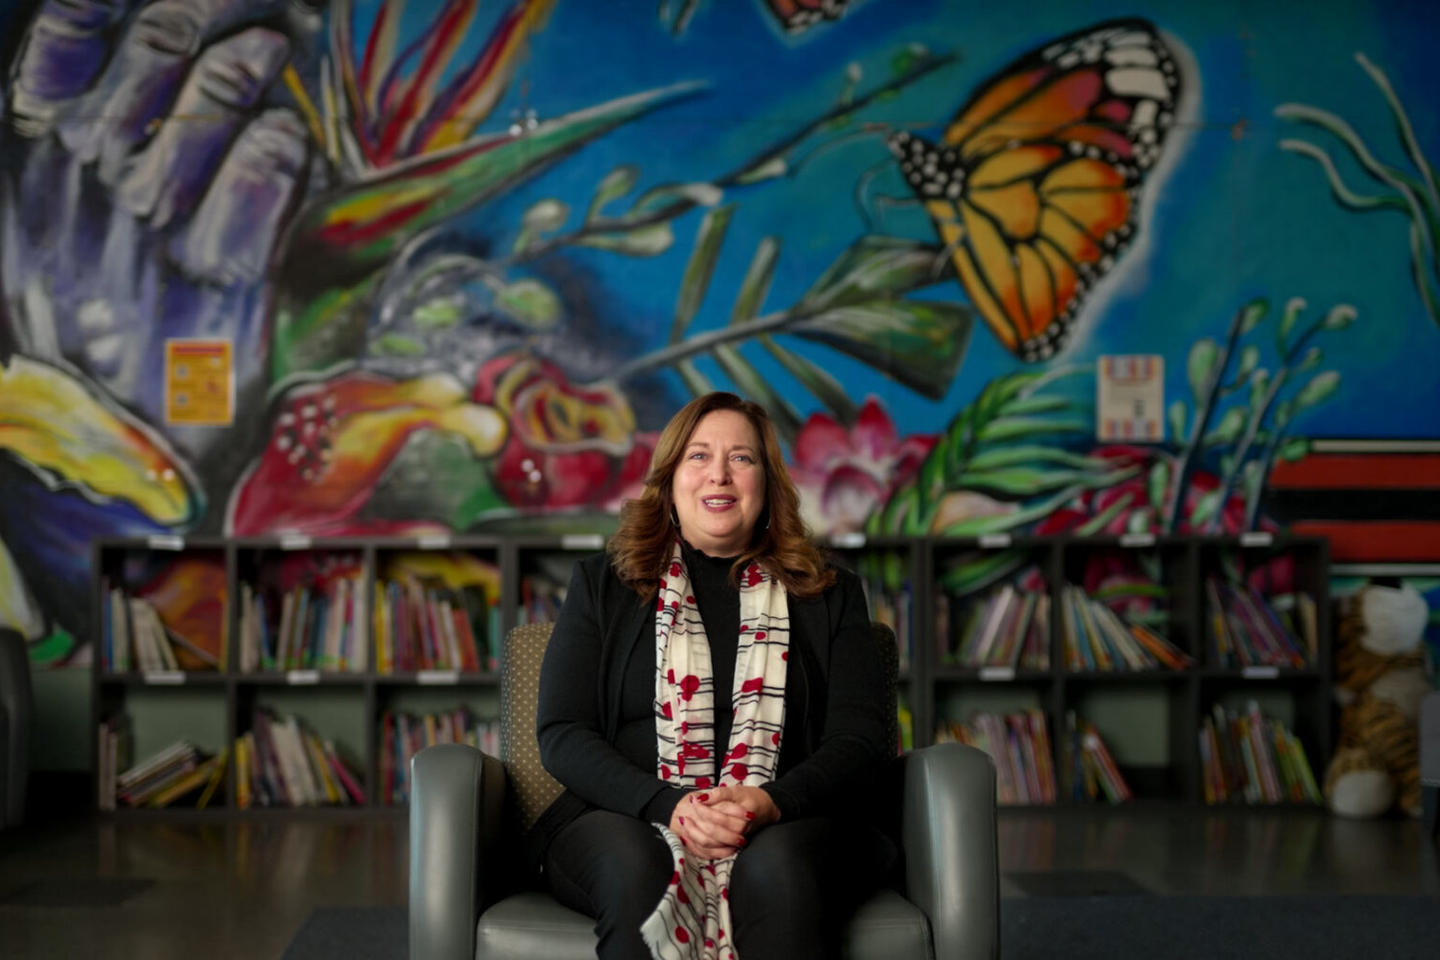 Woman sitting in front of a vibrant mural, with bookshelves and stuffed toys nearby.